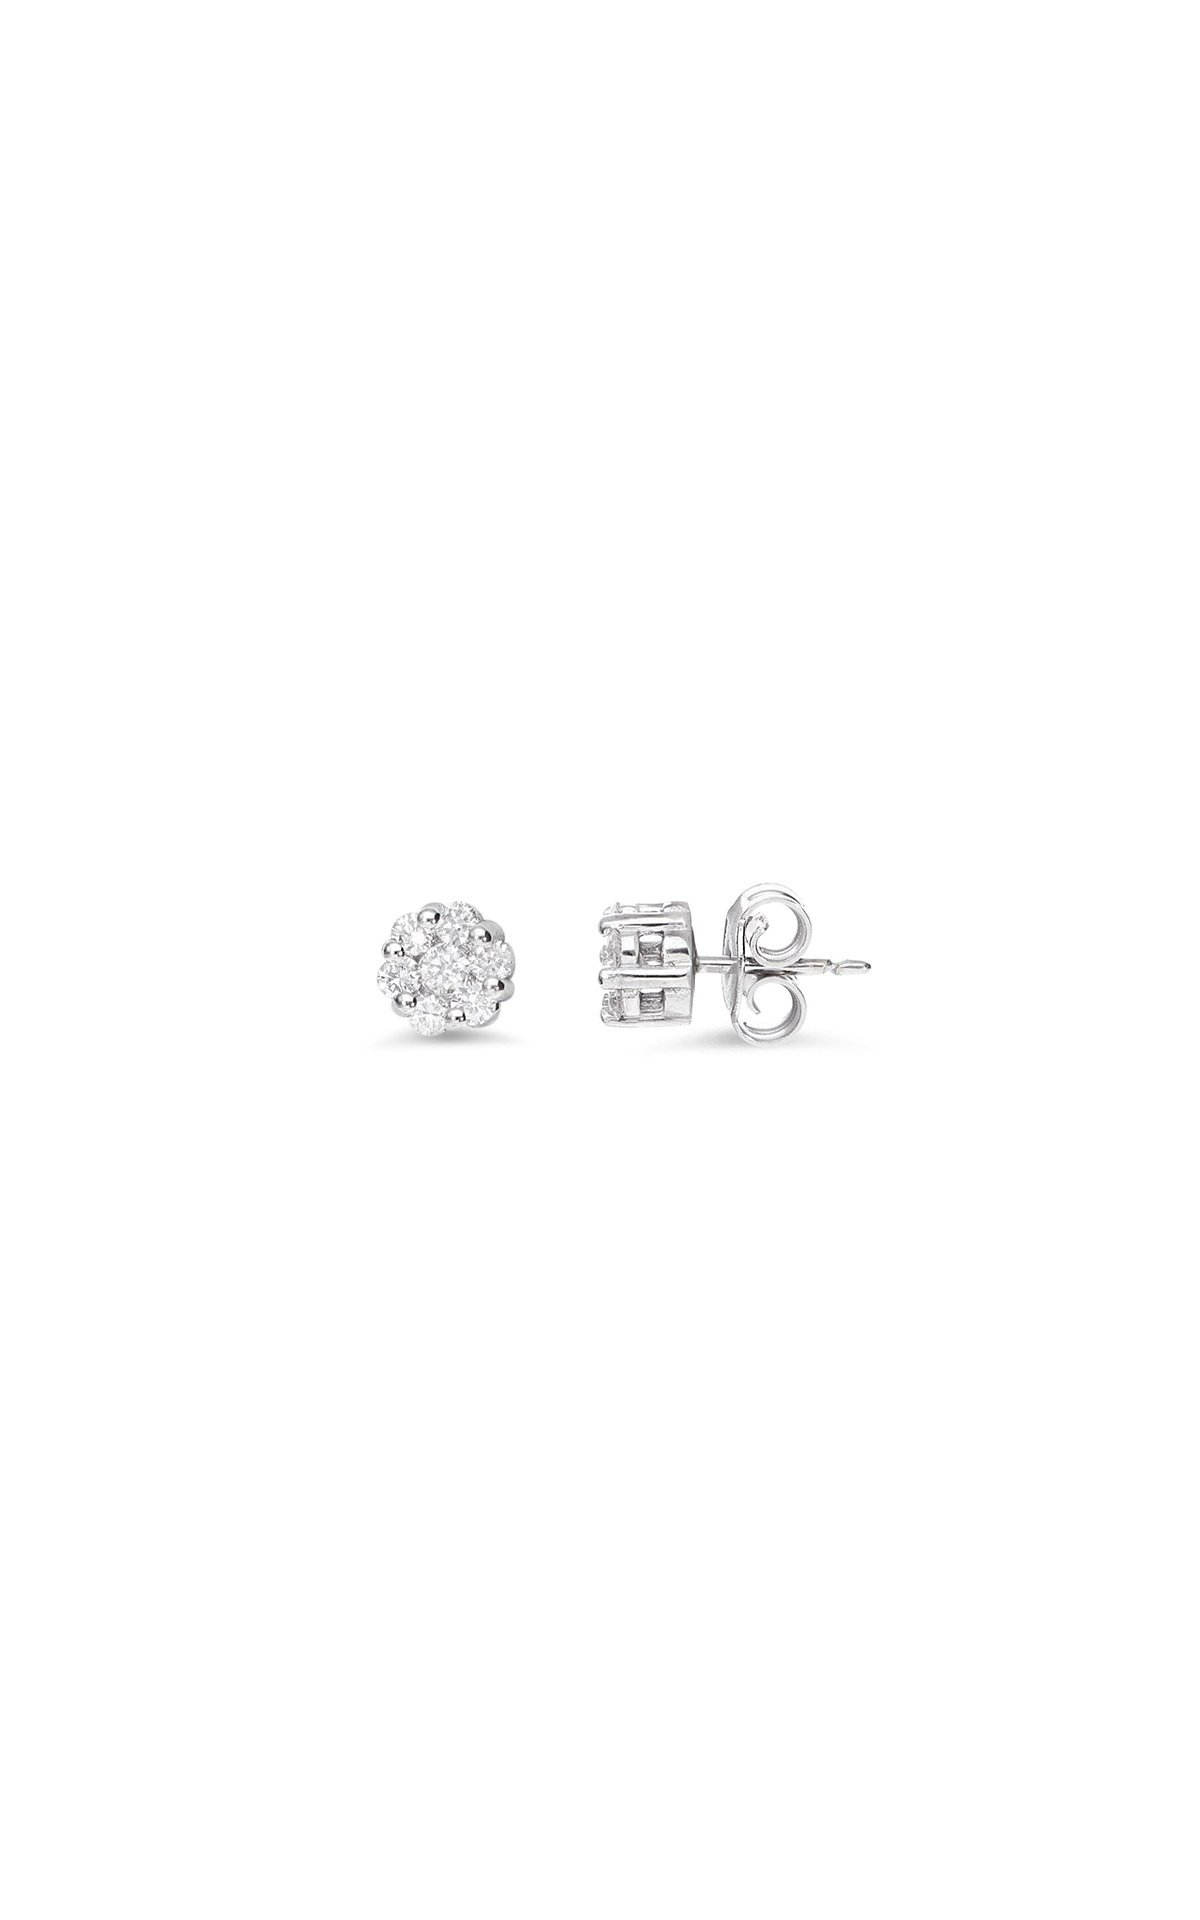 White gold earrings with diamonds by ORO & CO